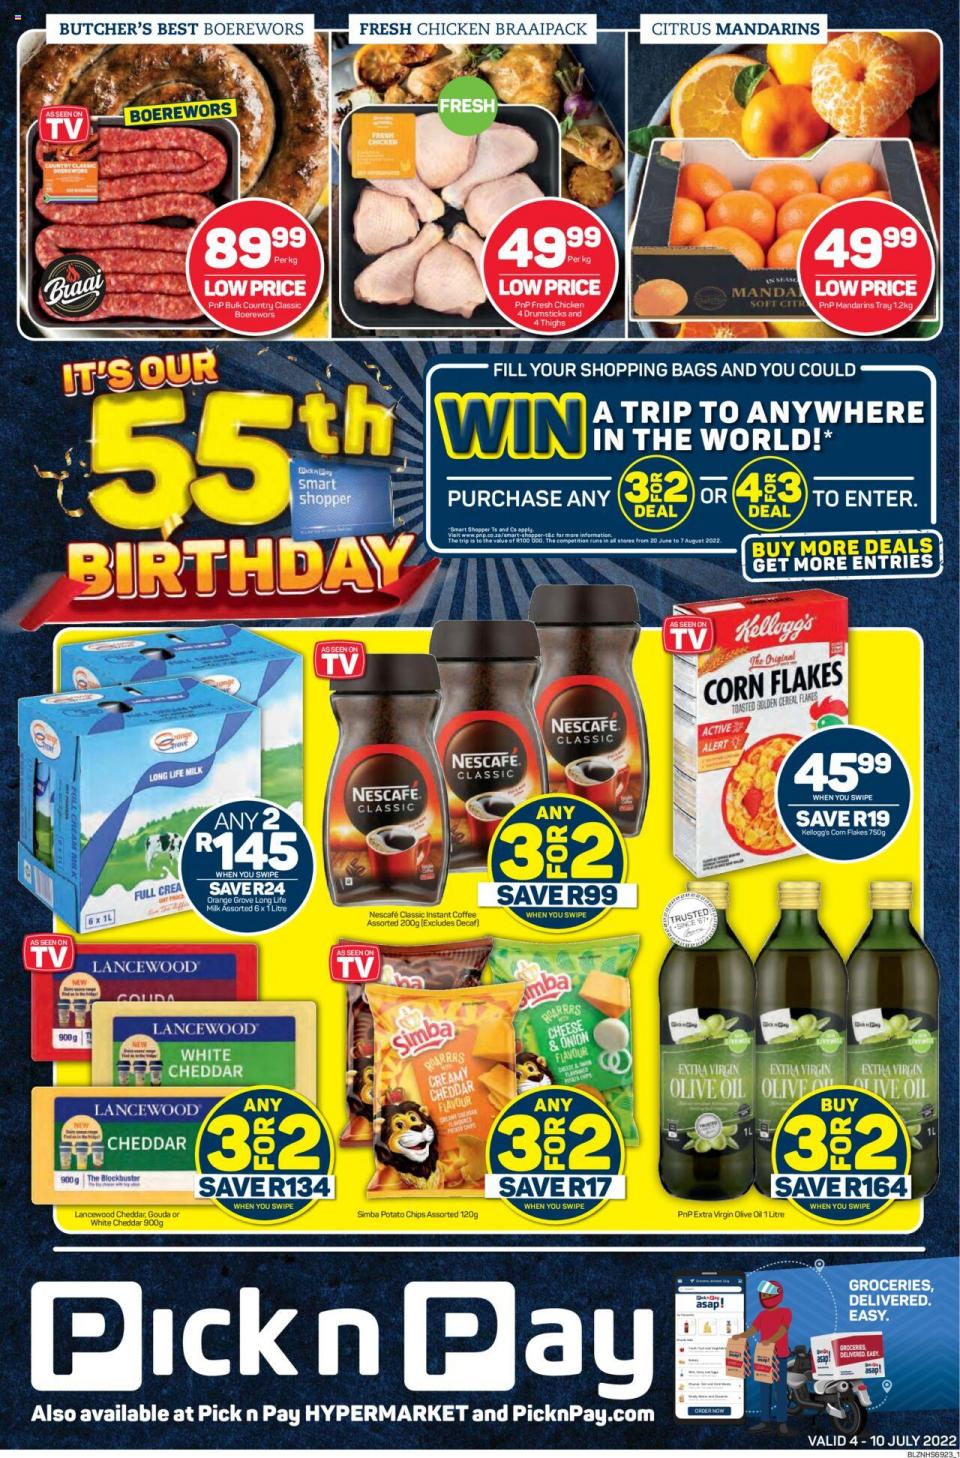 Pick n Pay Specials 4 – 10 July 2022